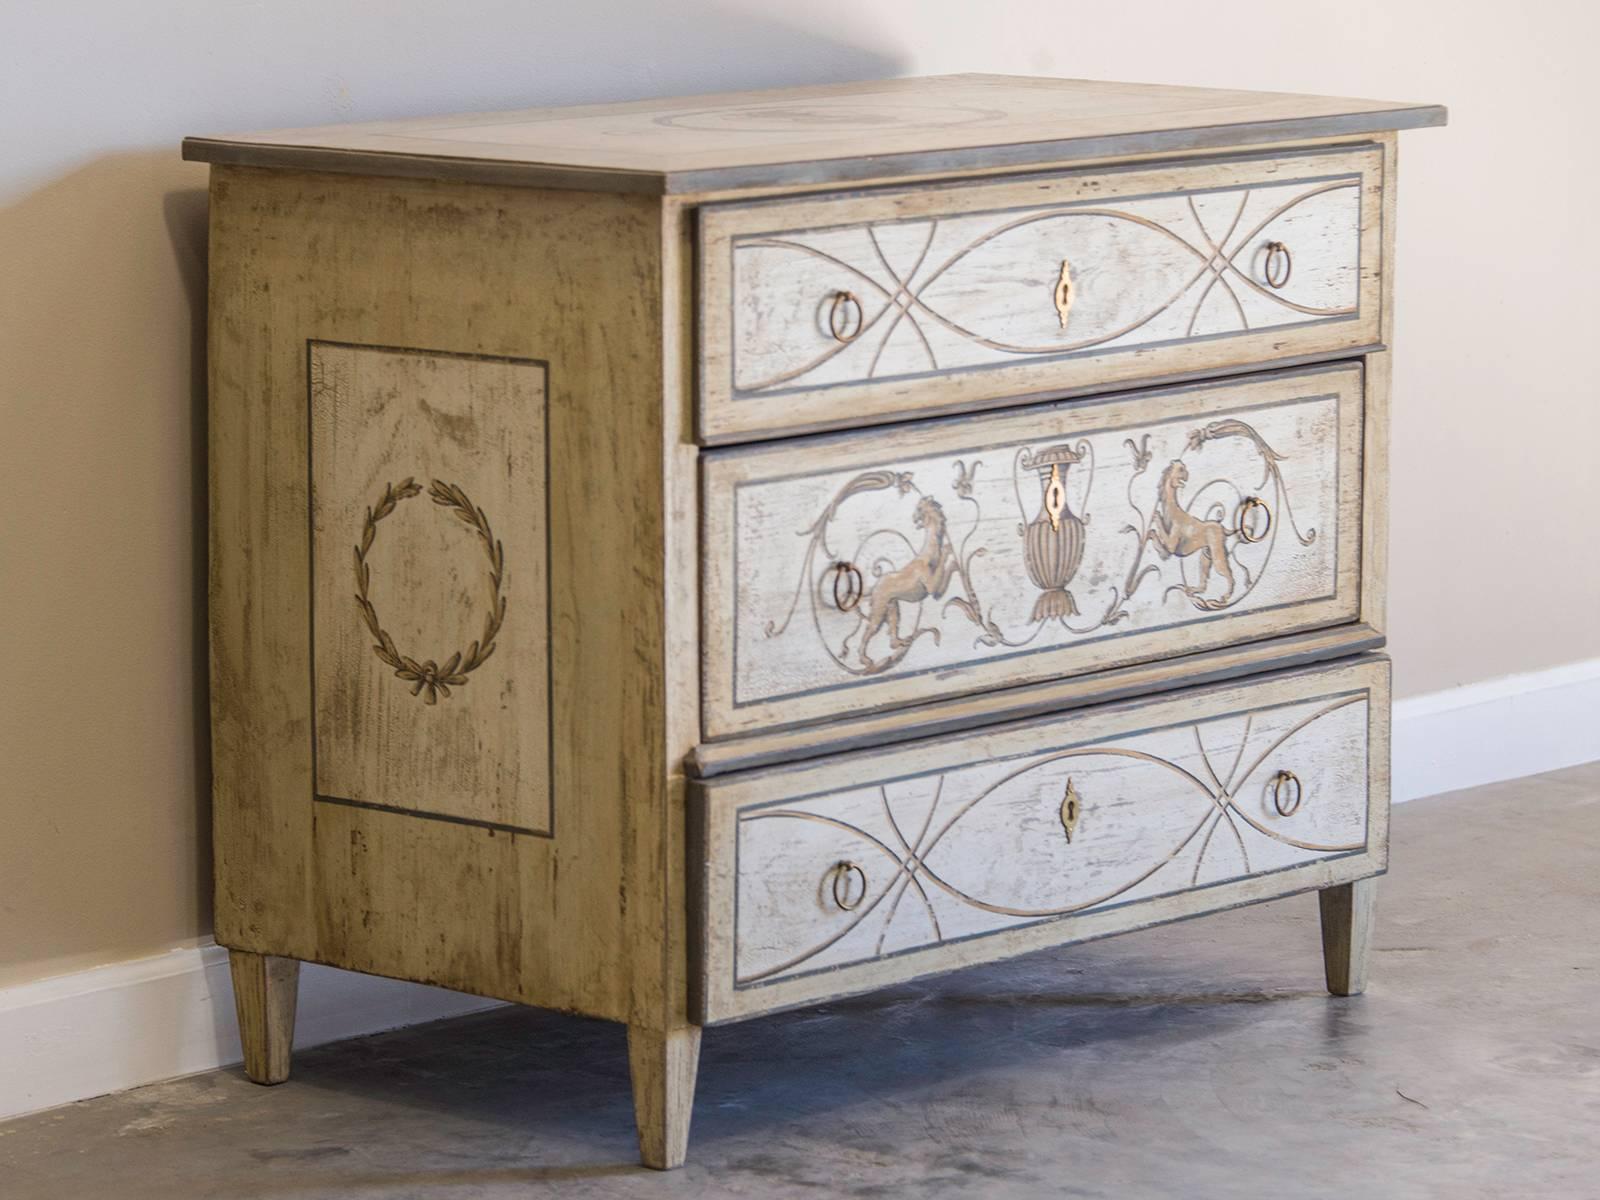 Receive our new selections direct from 1stdibs by email each week. Please click Follow Dealer below and see them first!

This early nineteenth century antique German chest has three drawers with each drawer front having a different profile as well